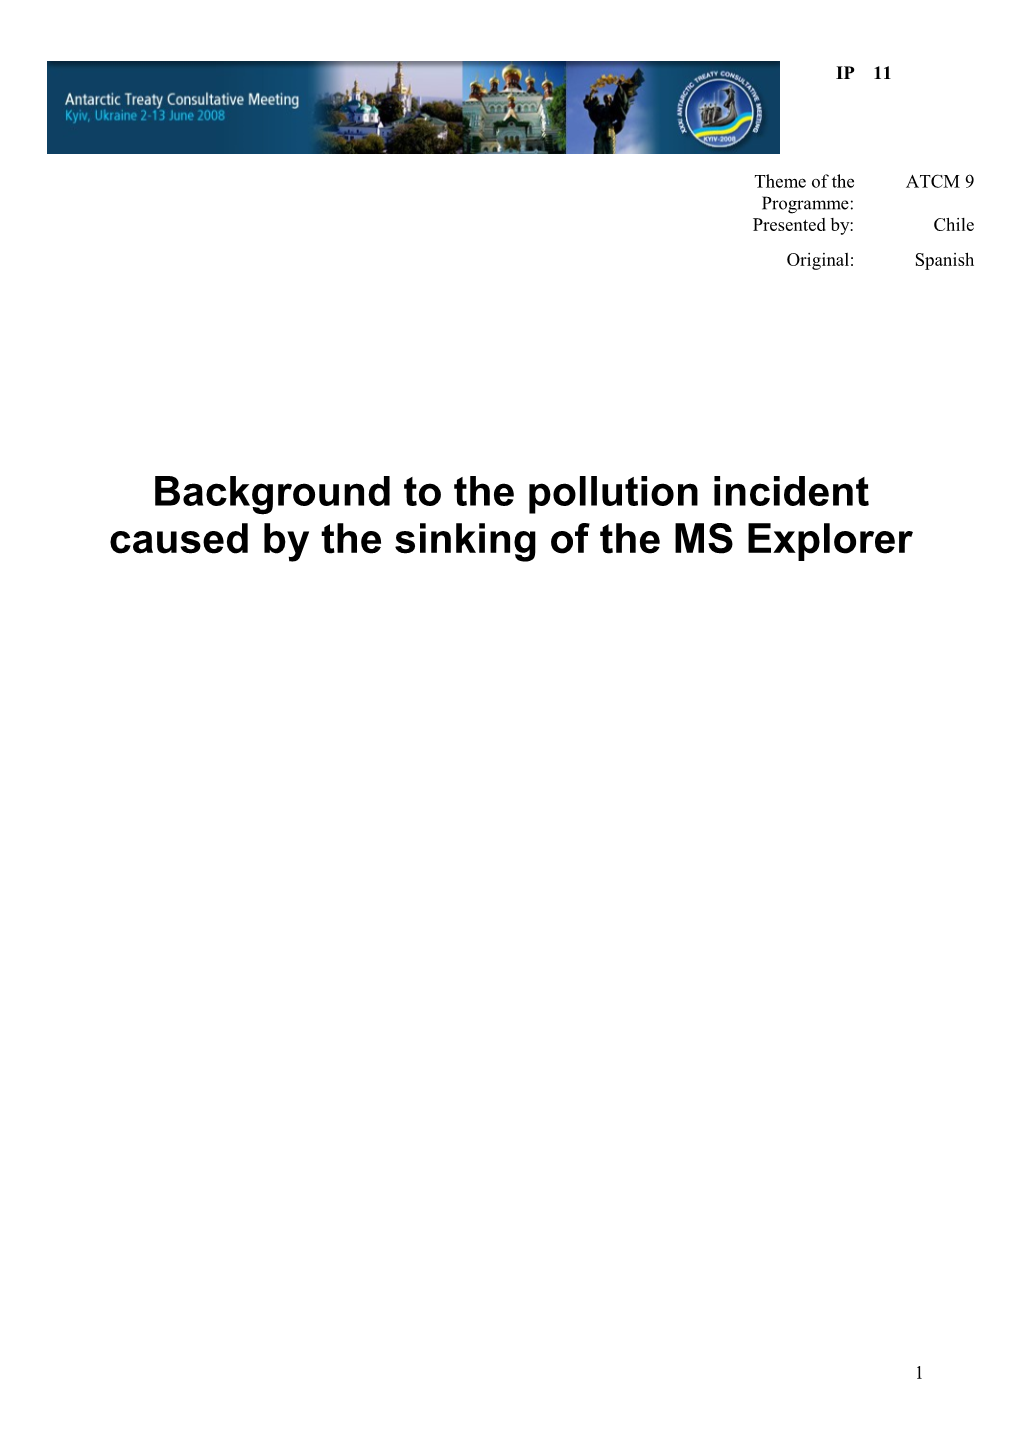 Background to the Pollution Incident Caused by the Sinking of the MS Explorer